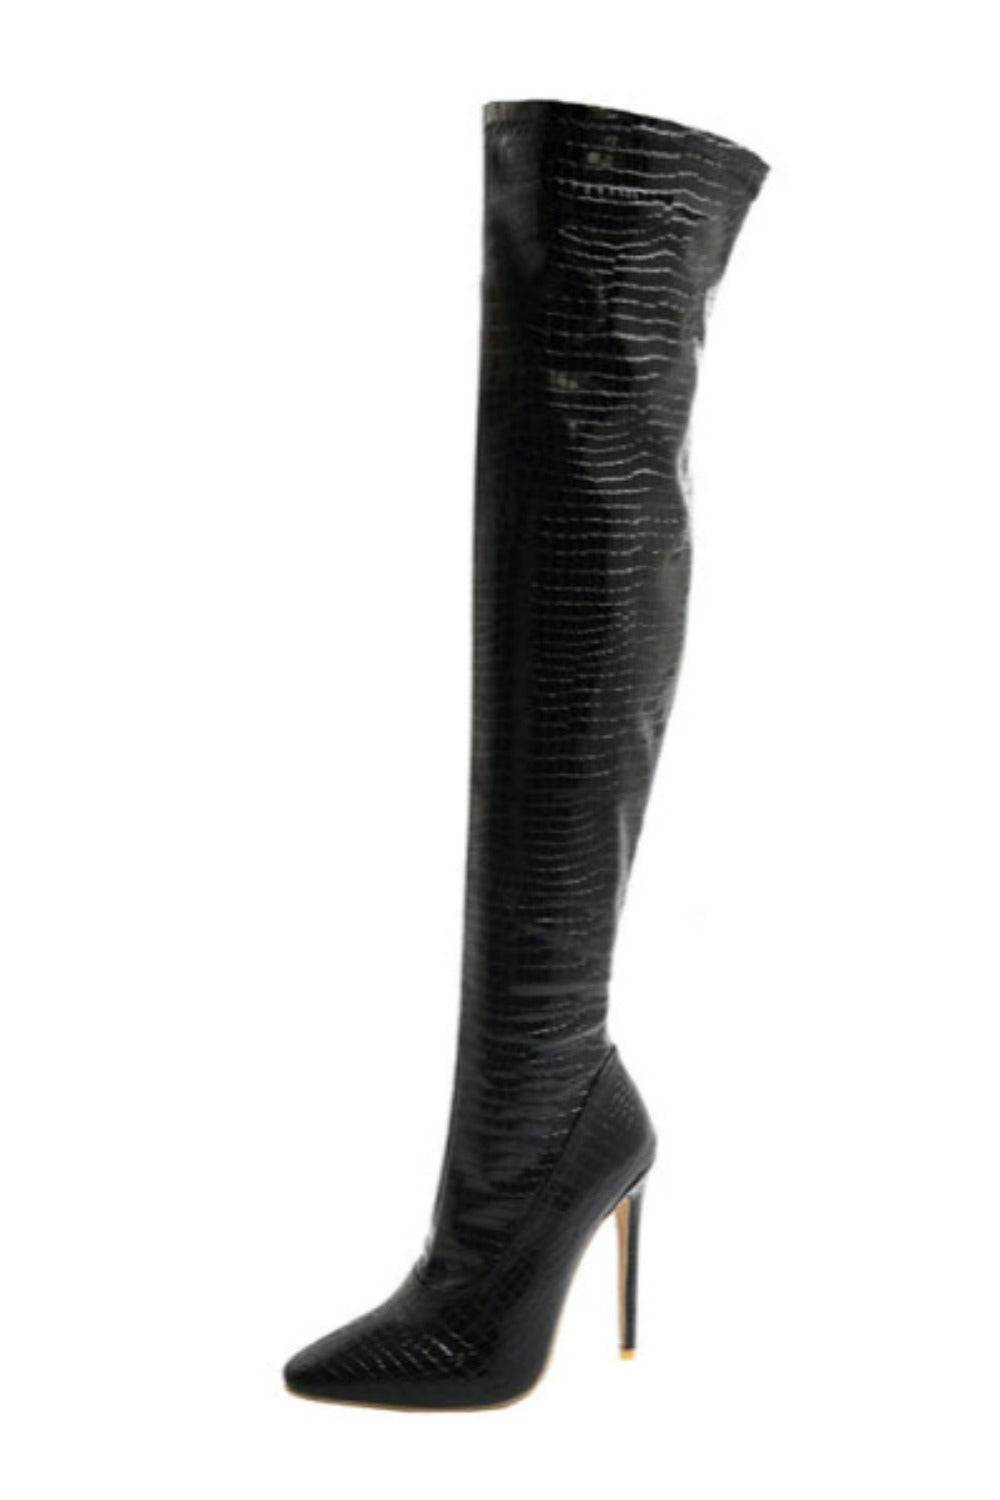 Ruby Metallic Knee High Black Crocodile Boots - TGC Boutique - Gold Boots